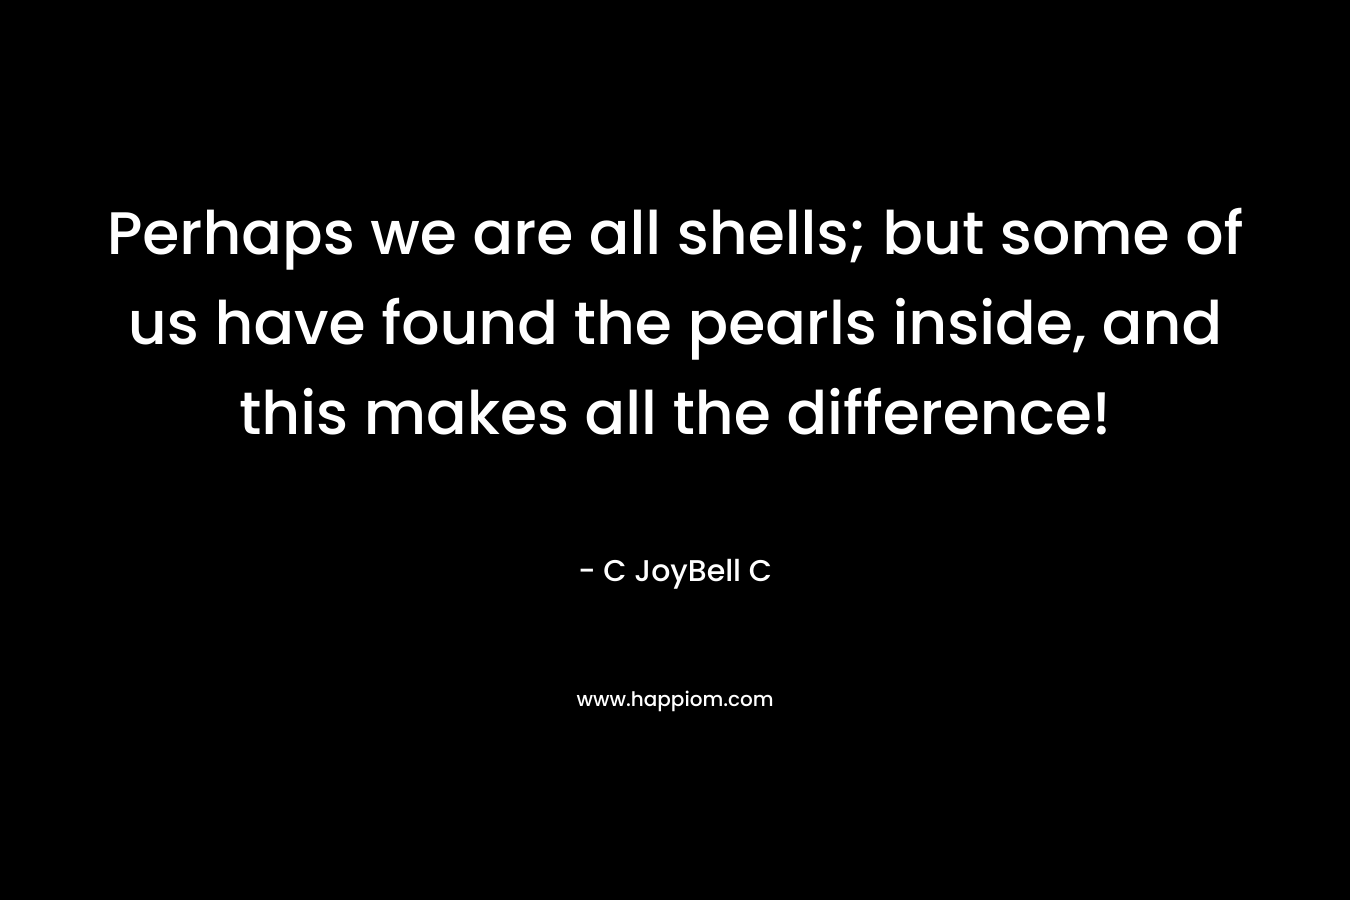 Perhaps we are all shells; but some of us have found the pearls inside, and this makes all the difference!